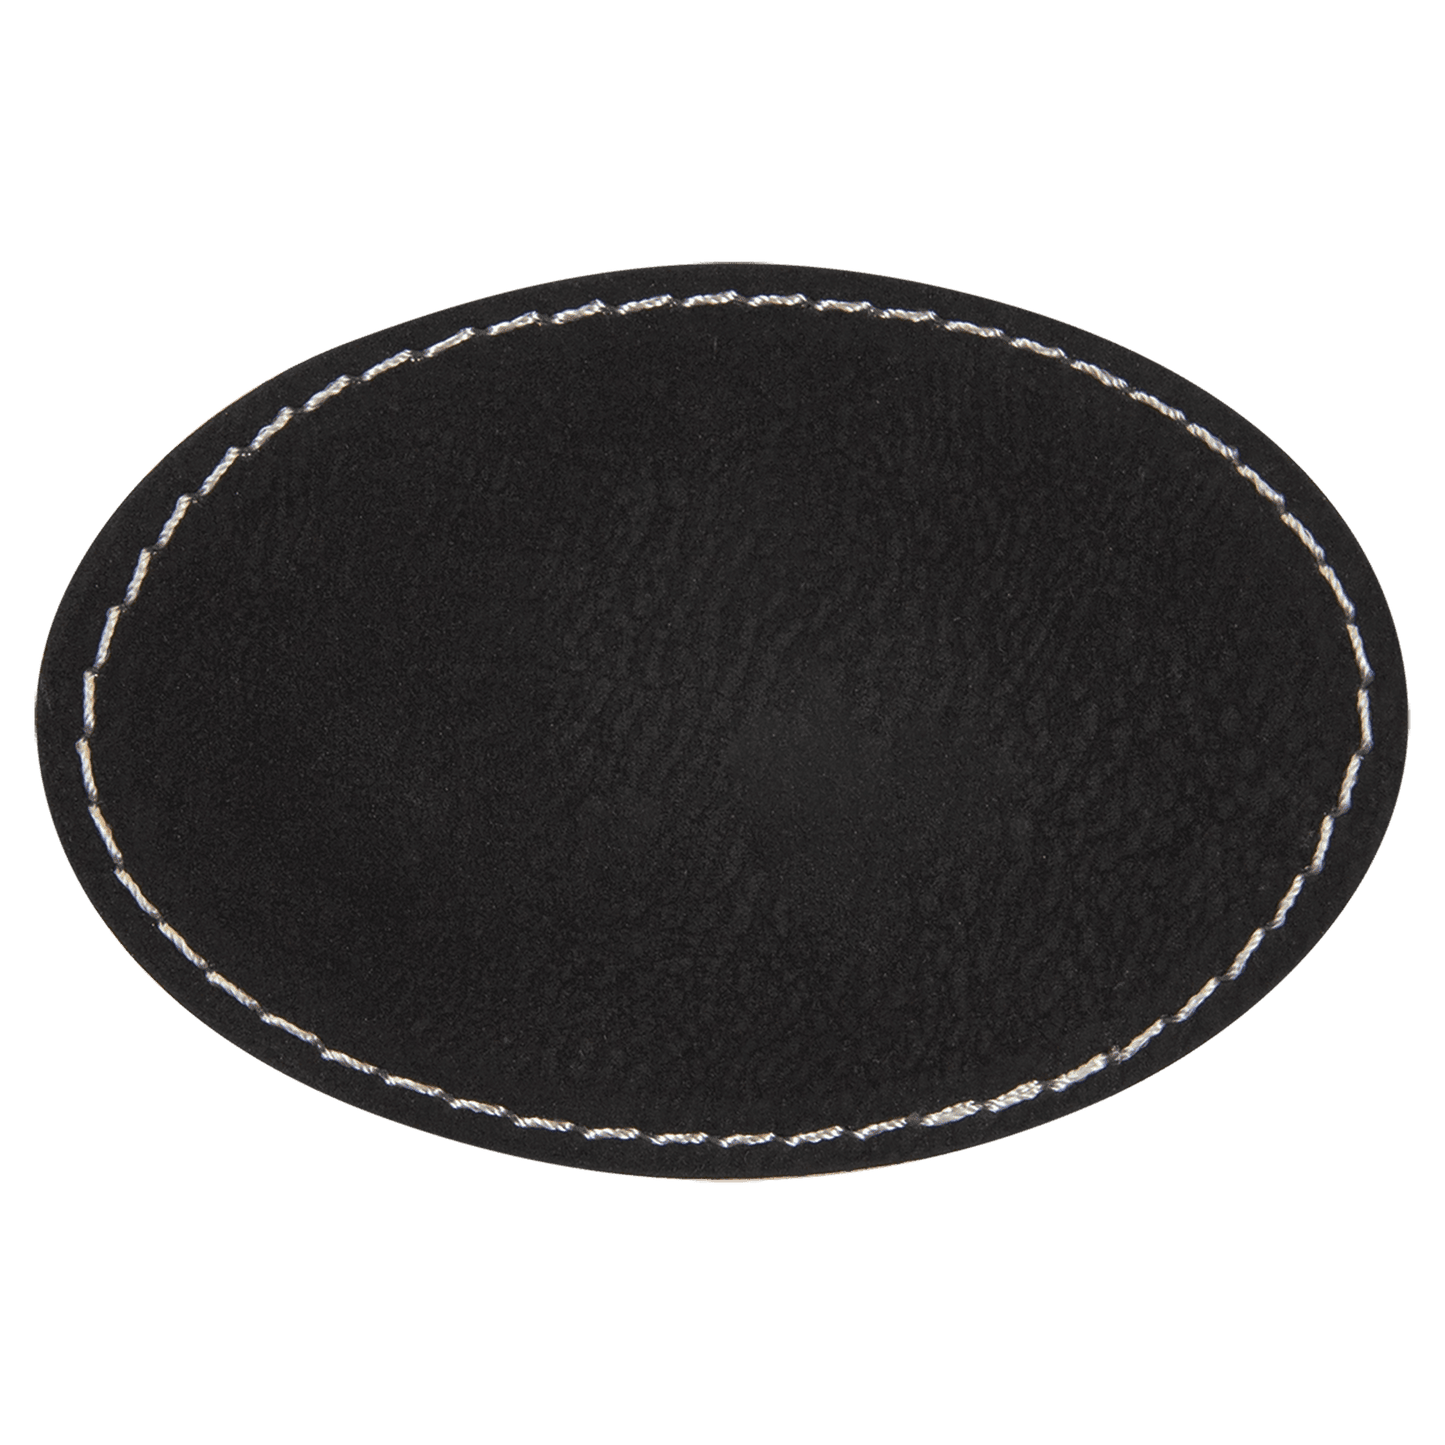 3" x 2" Oval Black Silver Laserable/DTF/UV DTF Leatherette Patch with Heat Adhesive